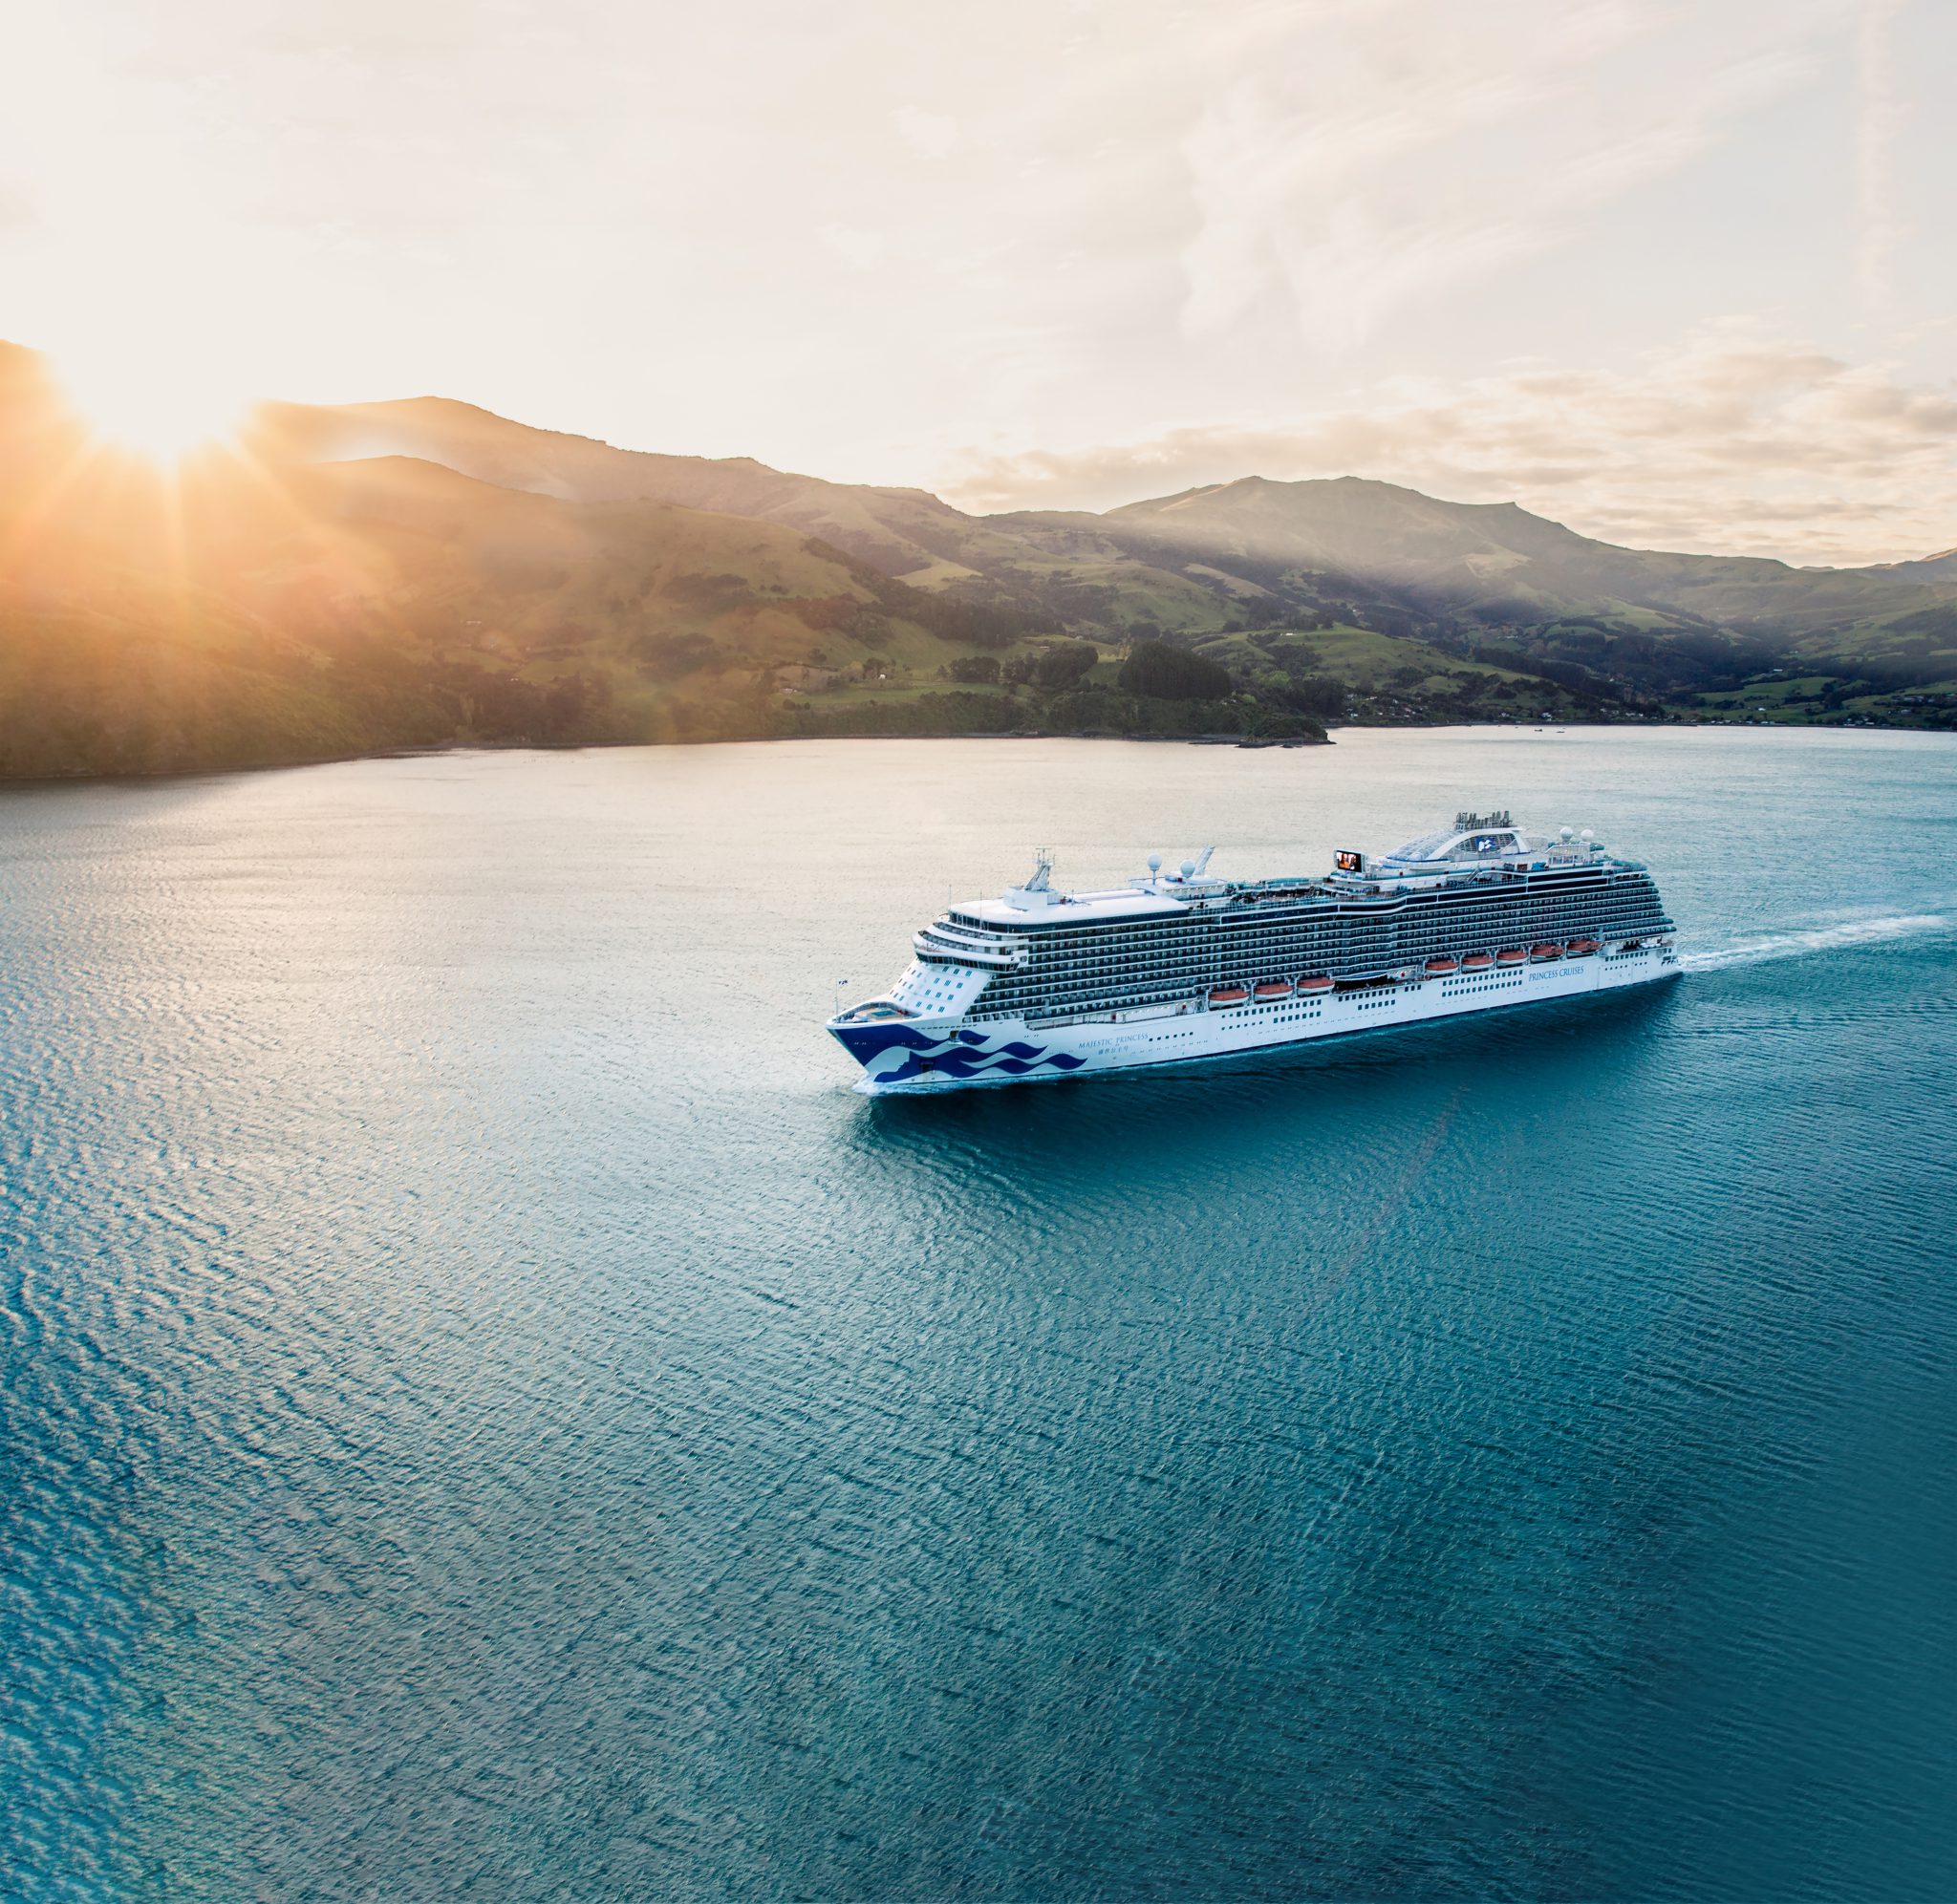 Princess Cruises returns to New Zealand with a host of new experiences Cruise Passenger